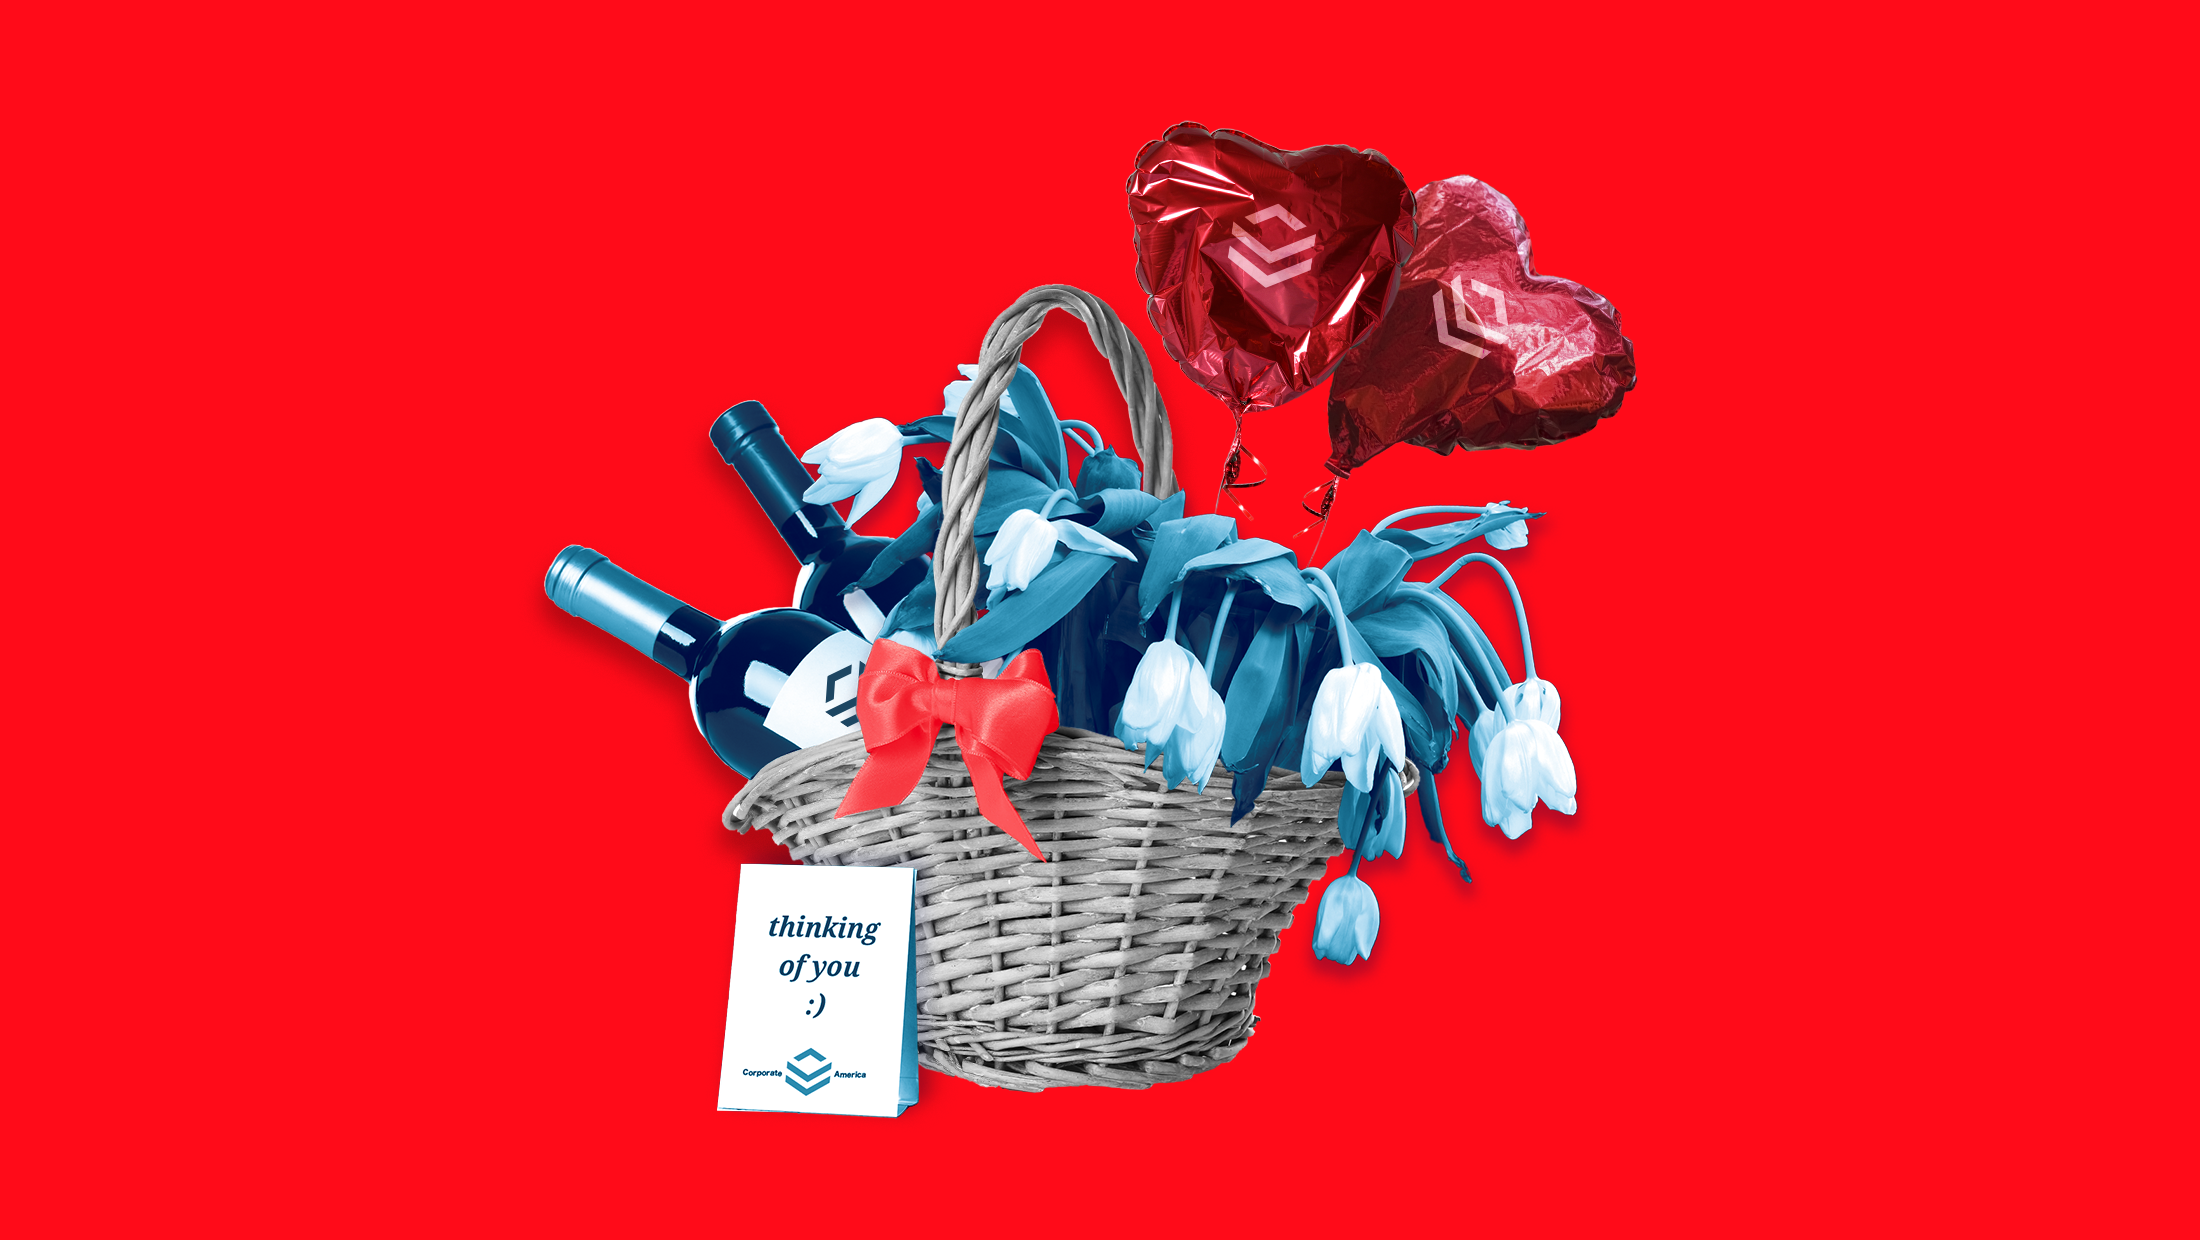 A wicker gift basket filled with wilted white tulips, two deflated red heart balloons, two bottles of wine and a card signed by "CORPORATE AMERICA" that says "THINKING OF YOU"